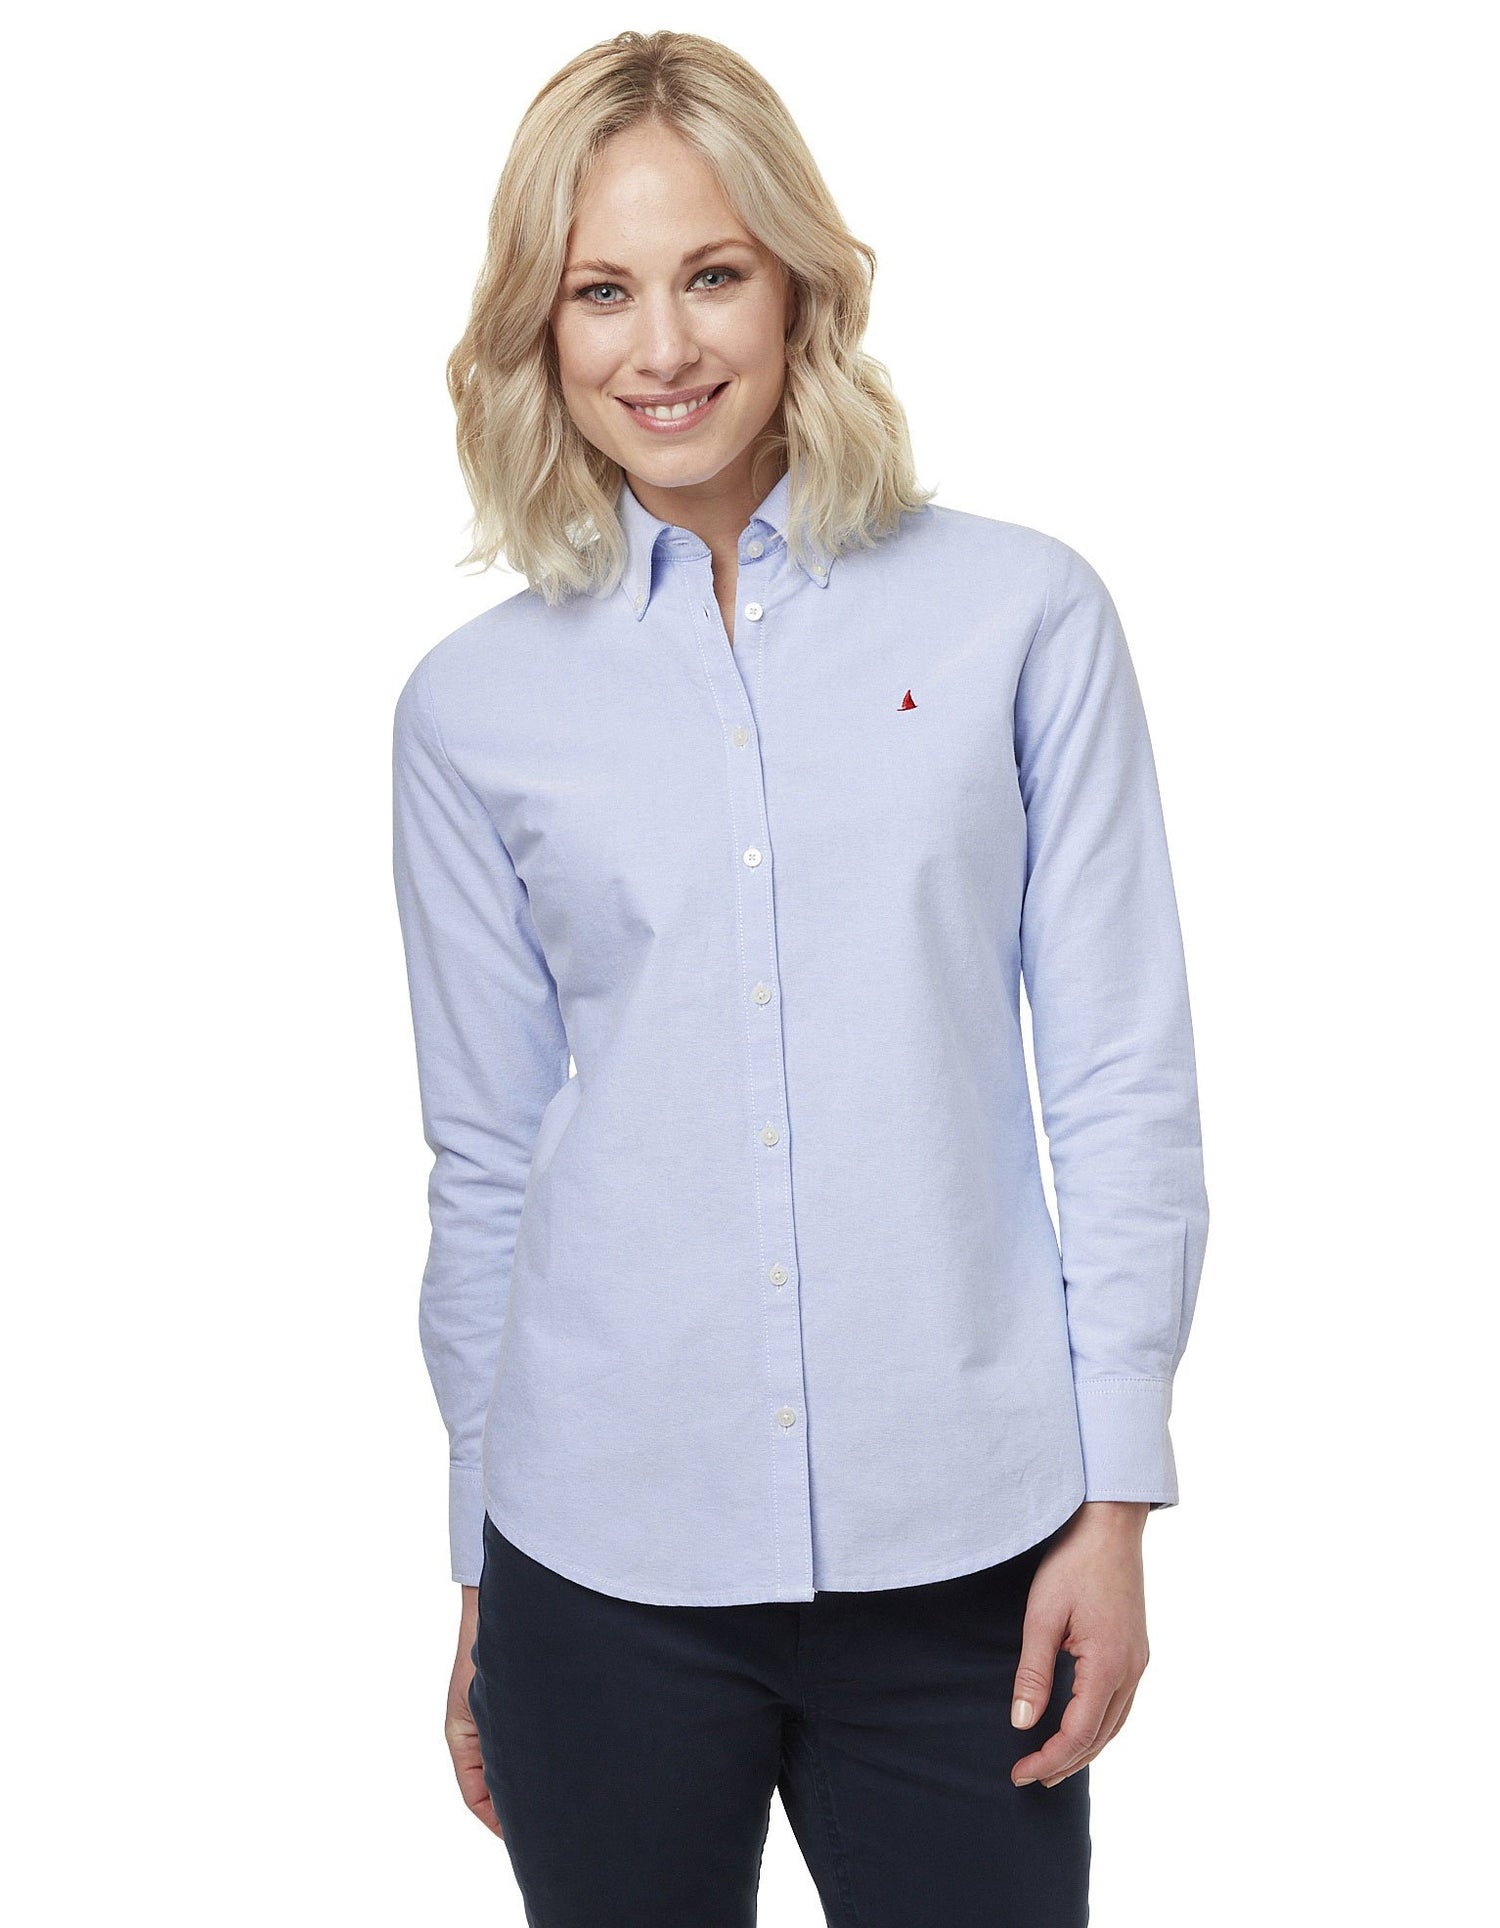 Woman wearing Oxford Cotton Shirt by Musto